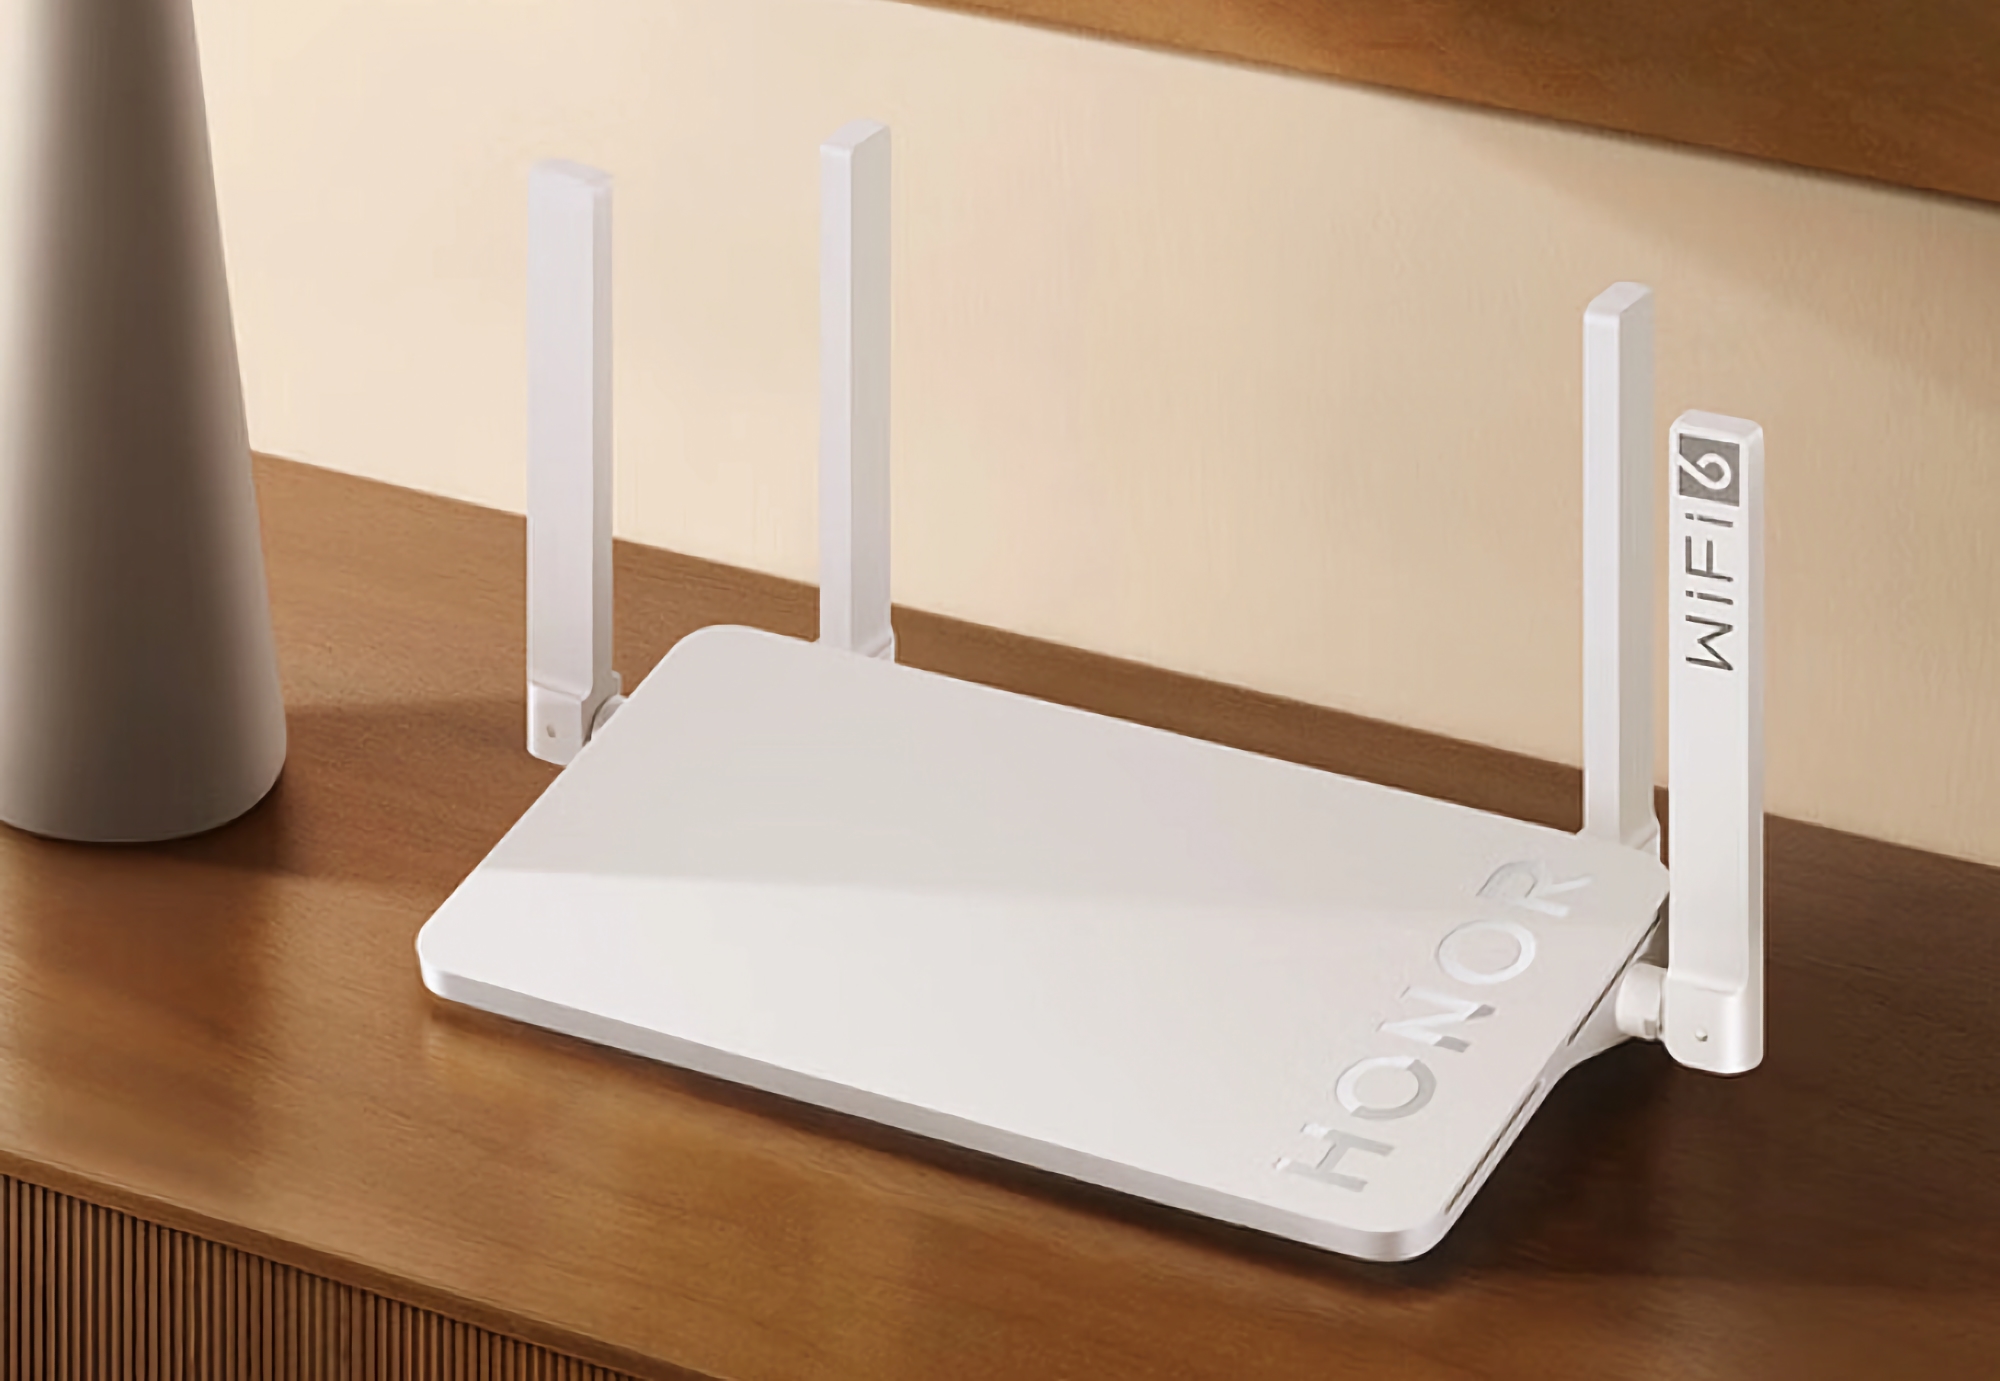 Honor introduced Router X4 Pro with Wi-Fi 6 and three Gigabit ports